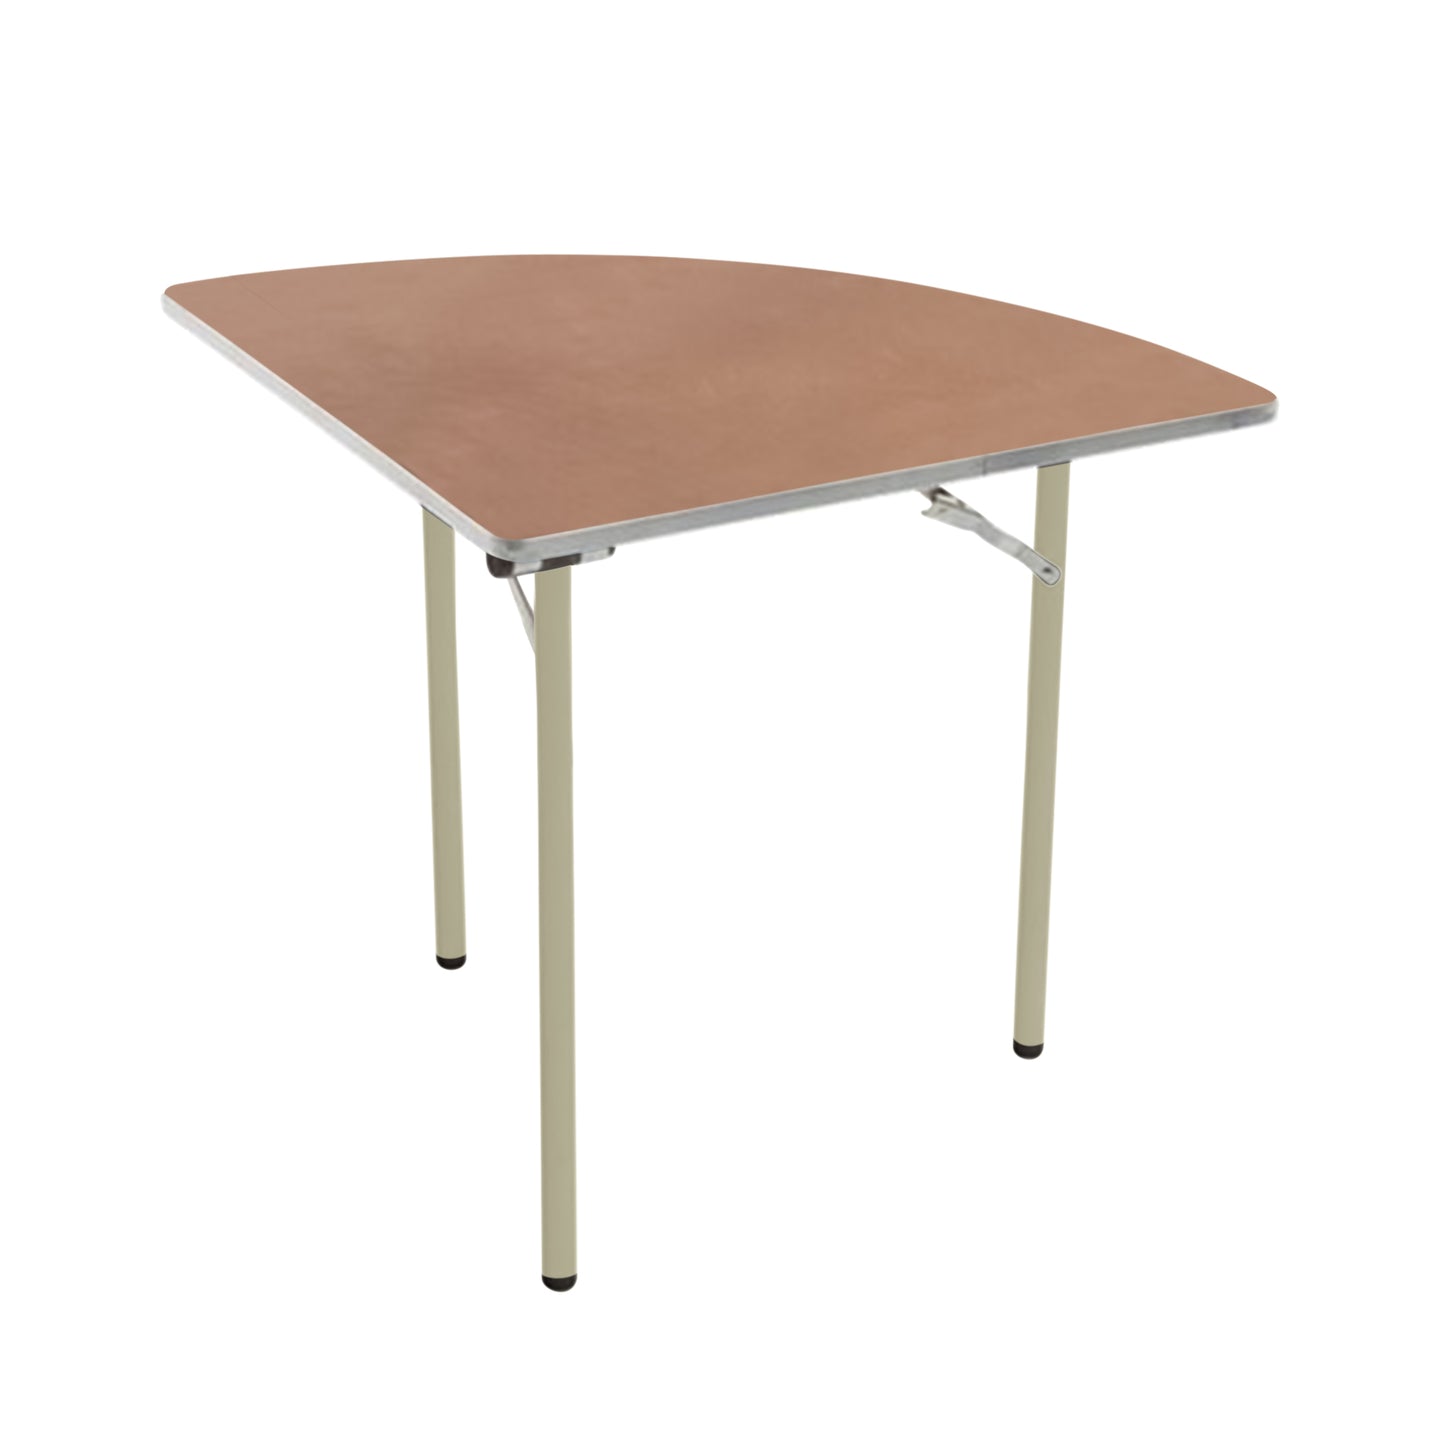 AmTab Folding Table - Plywood Stained and Sealed - Aluminum Edge - Quarter Round - Quarter 60" Diameter x 29"H  (AmTab AMT-QR60PA)